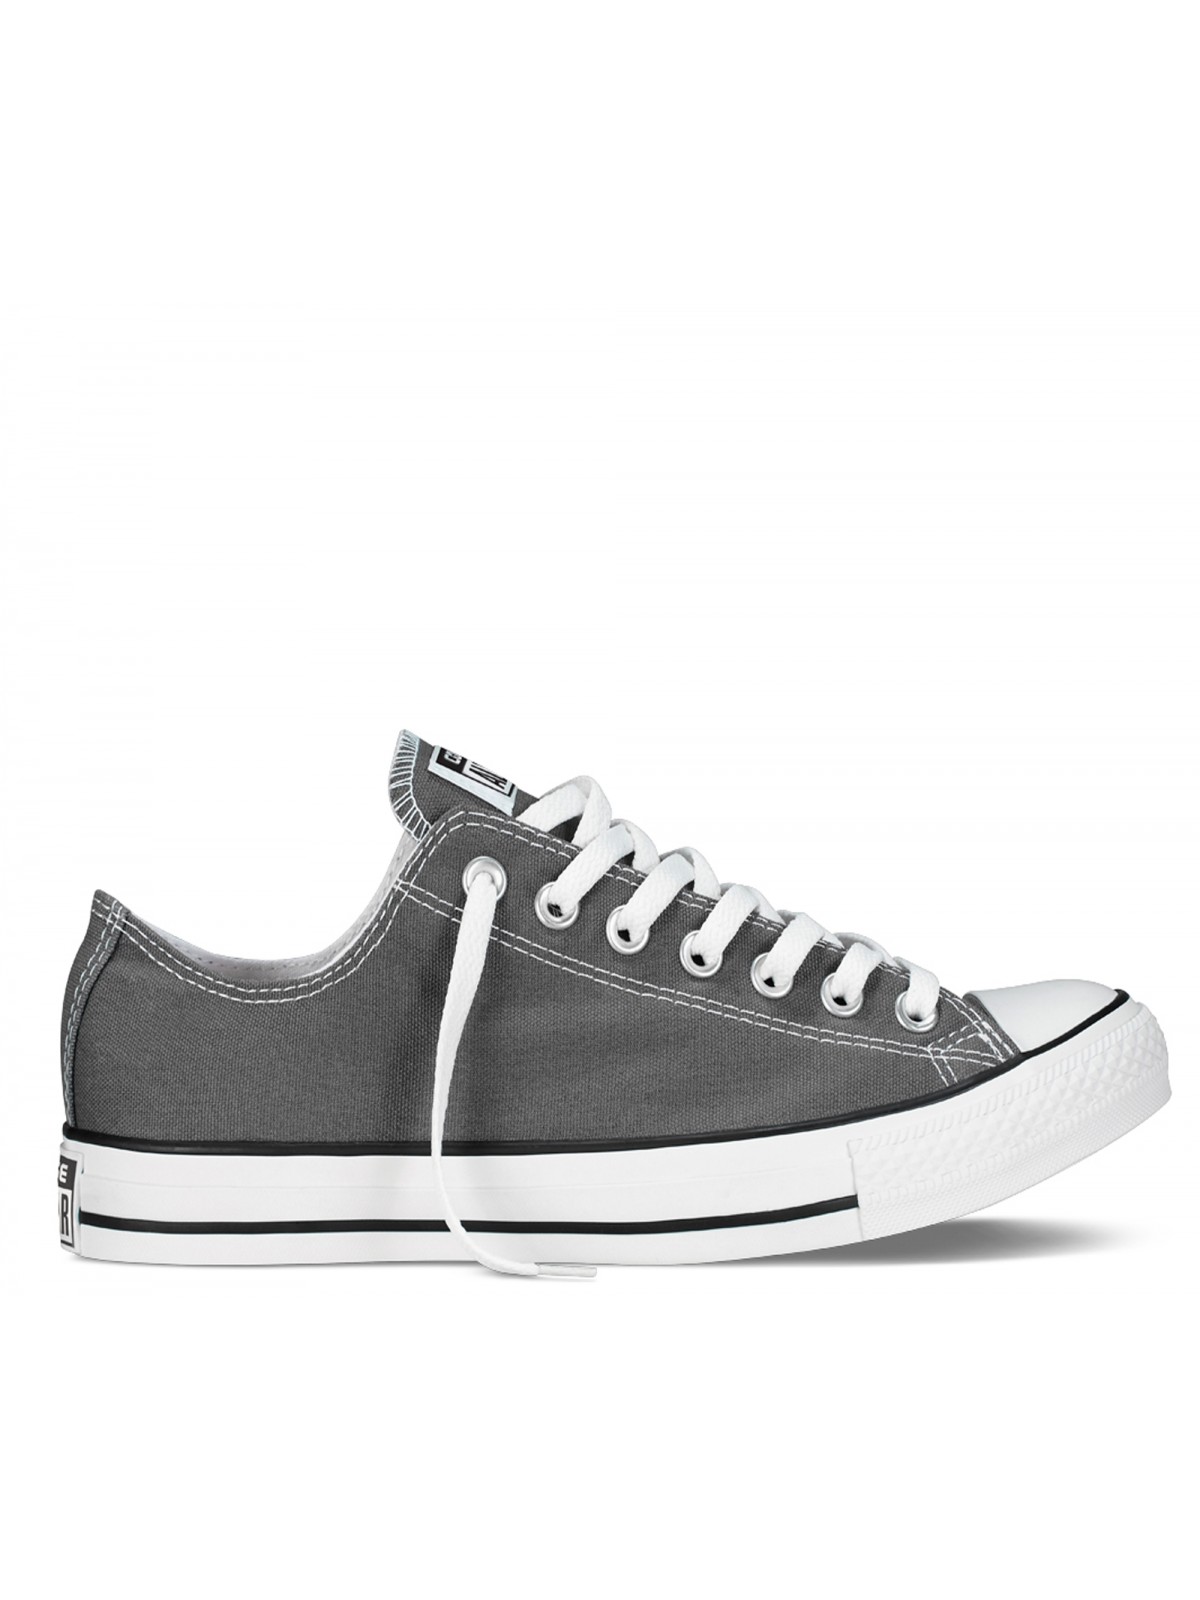 Converse Cadet Chuck Taylor all star toile basse anthracite